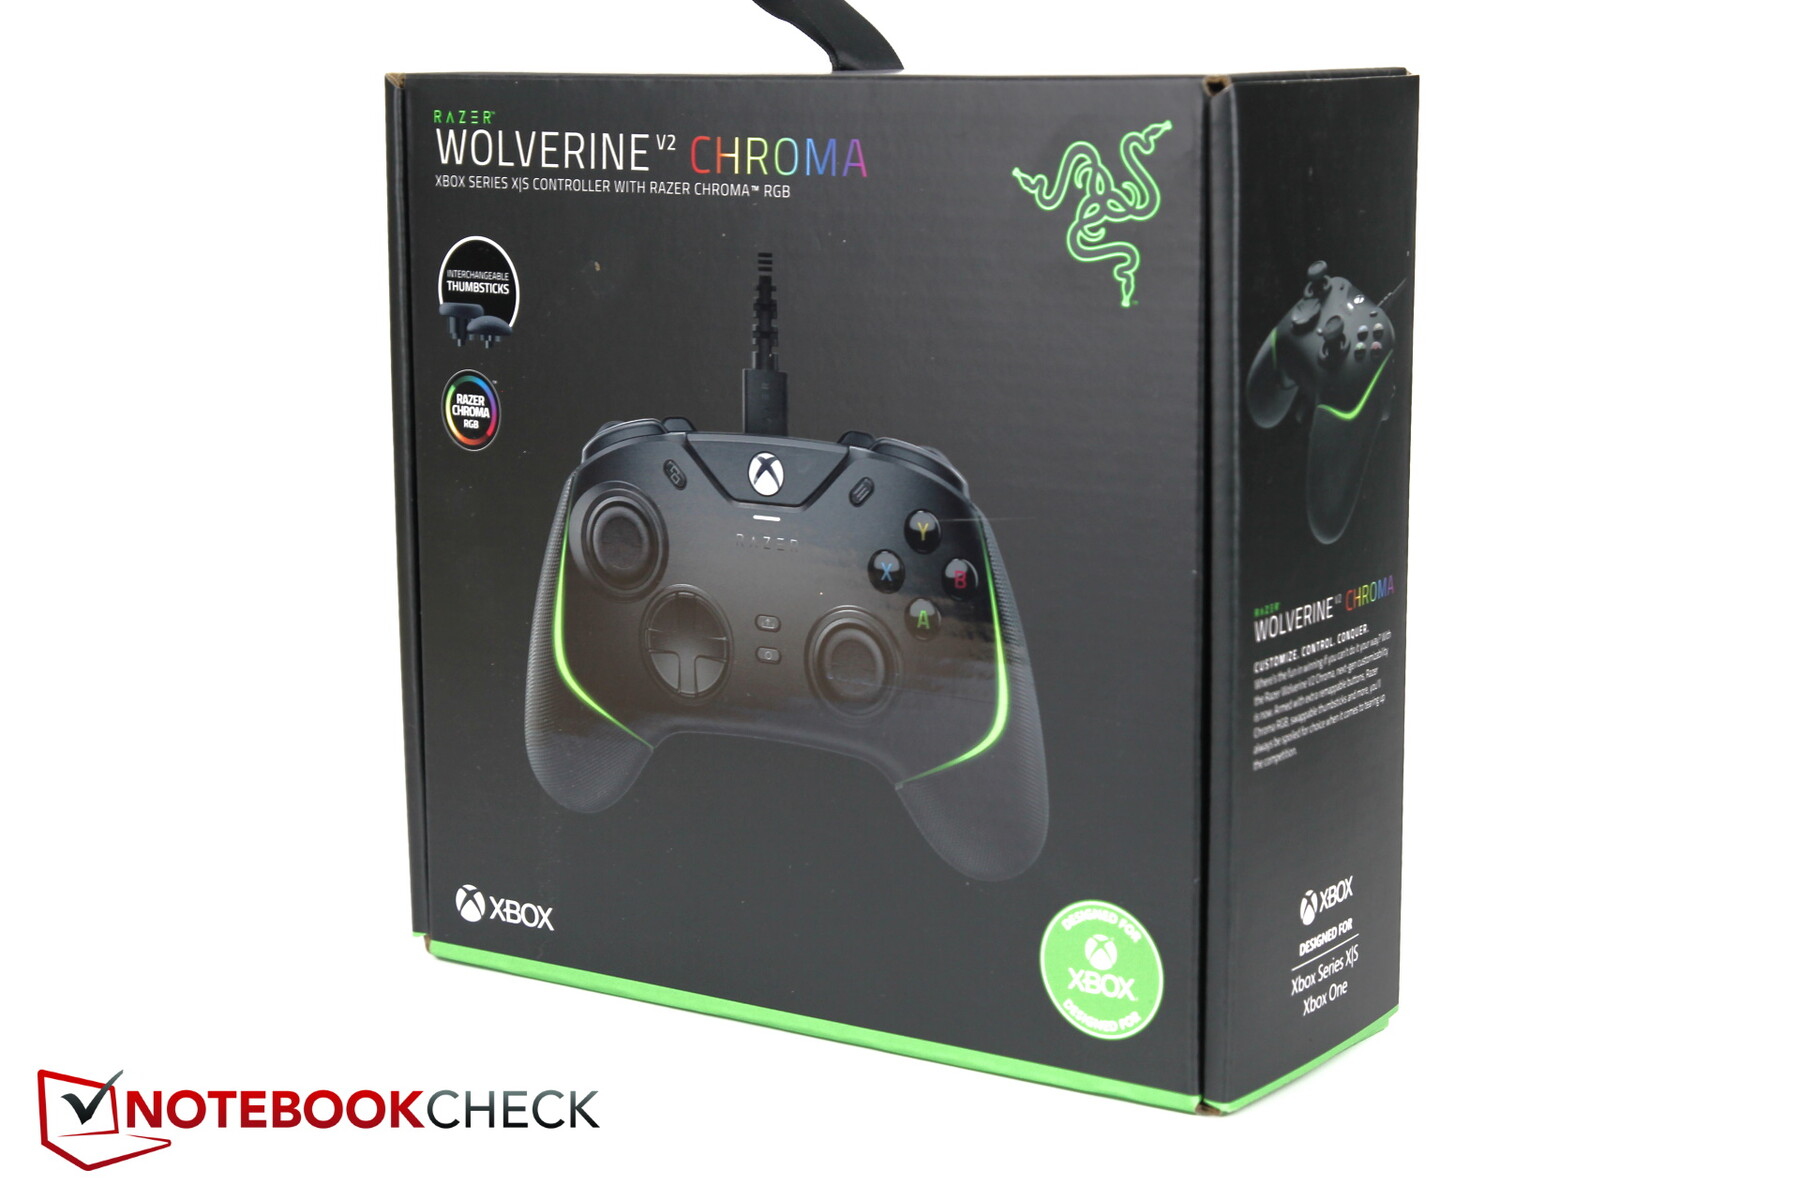 Razer Wolverine V2 Chroma hands-on: Extravagant gamepad with mechanical  buttons - NotebookCheck.net Reviews